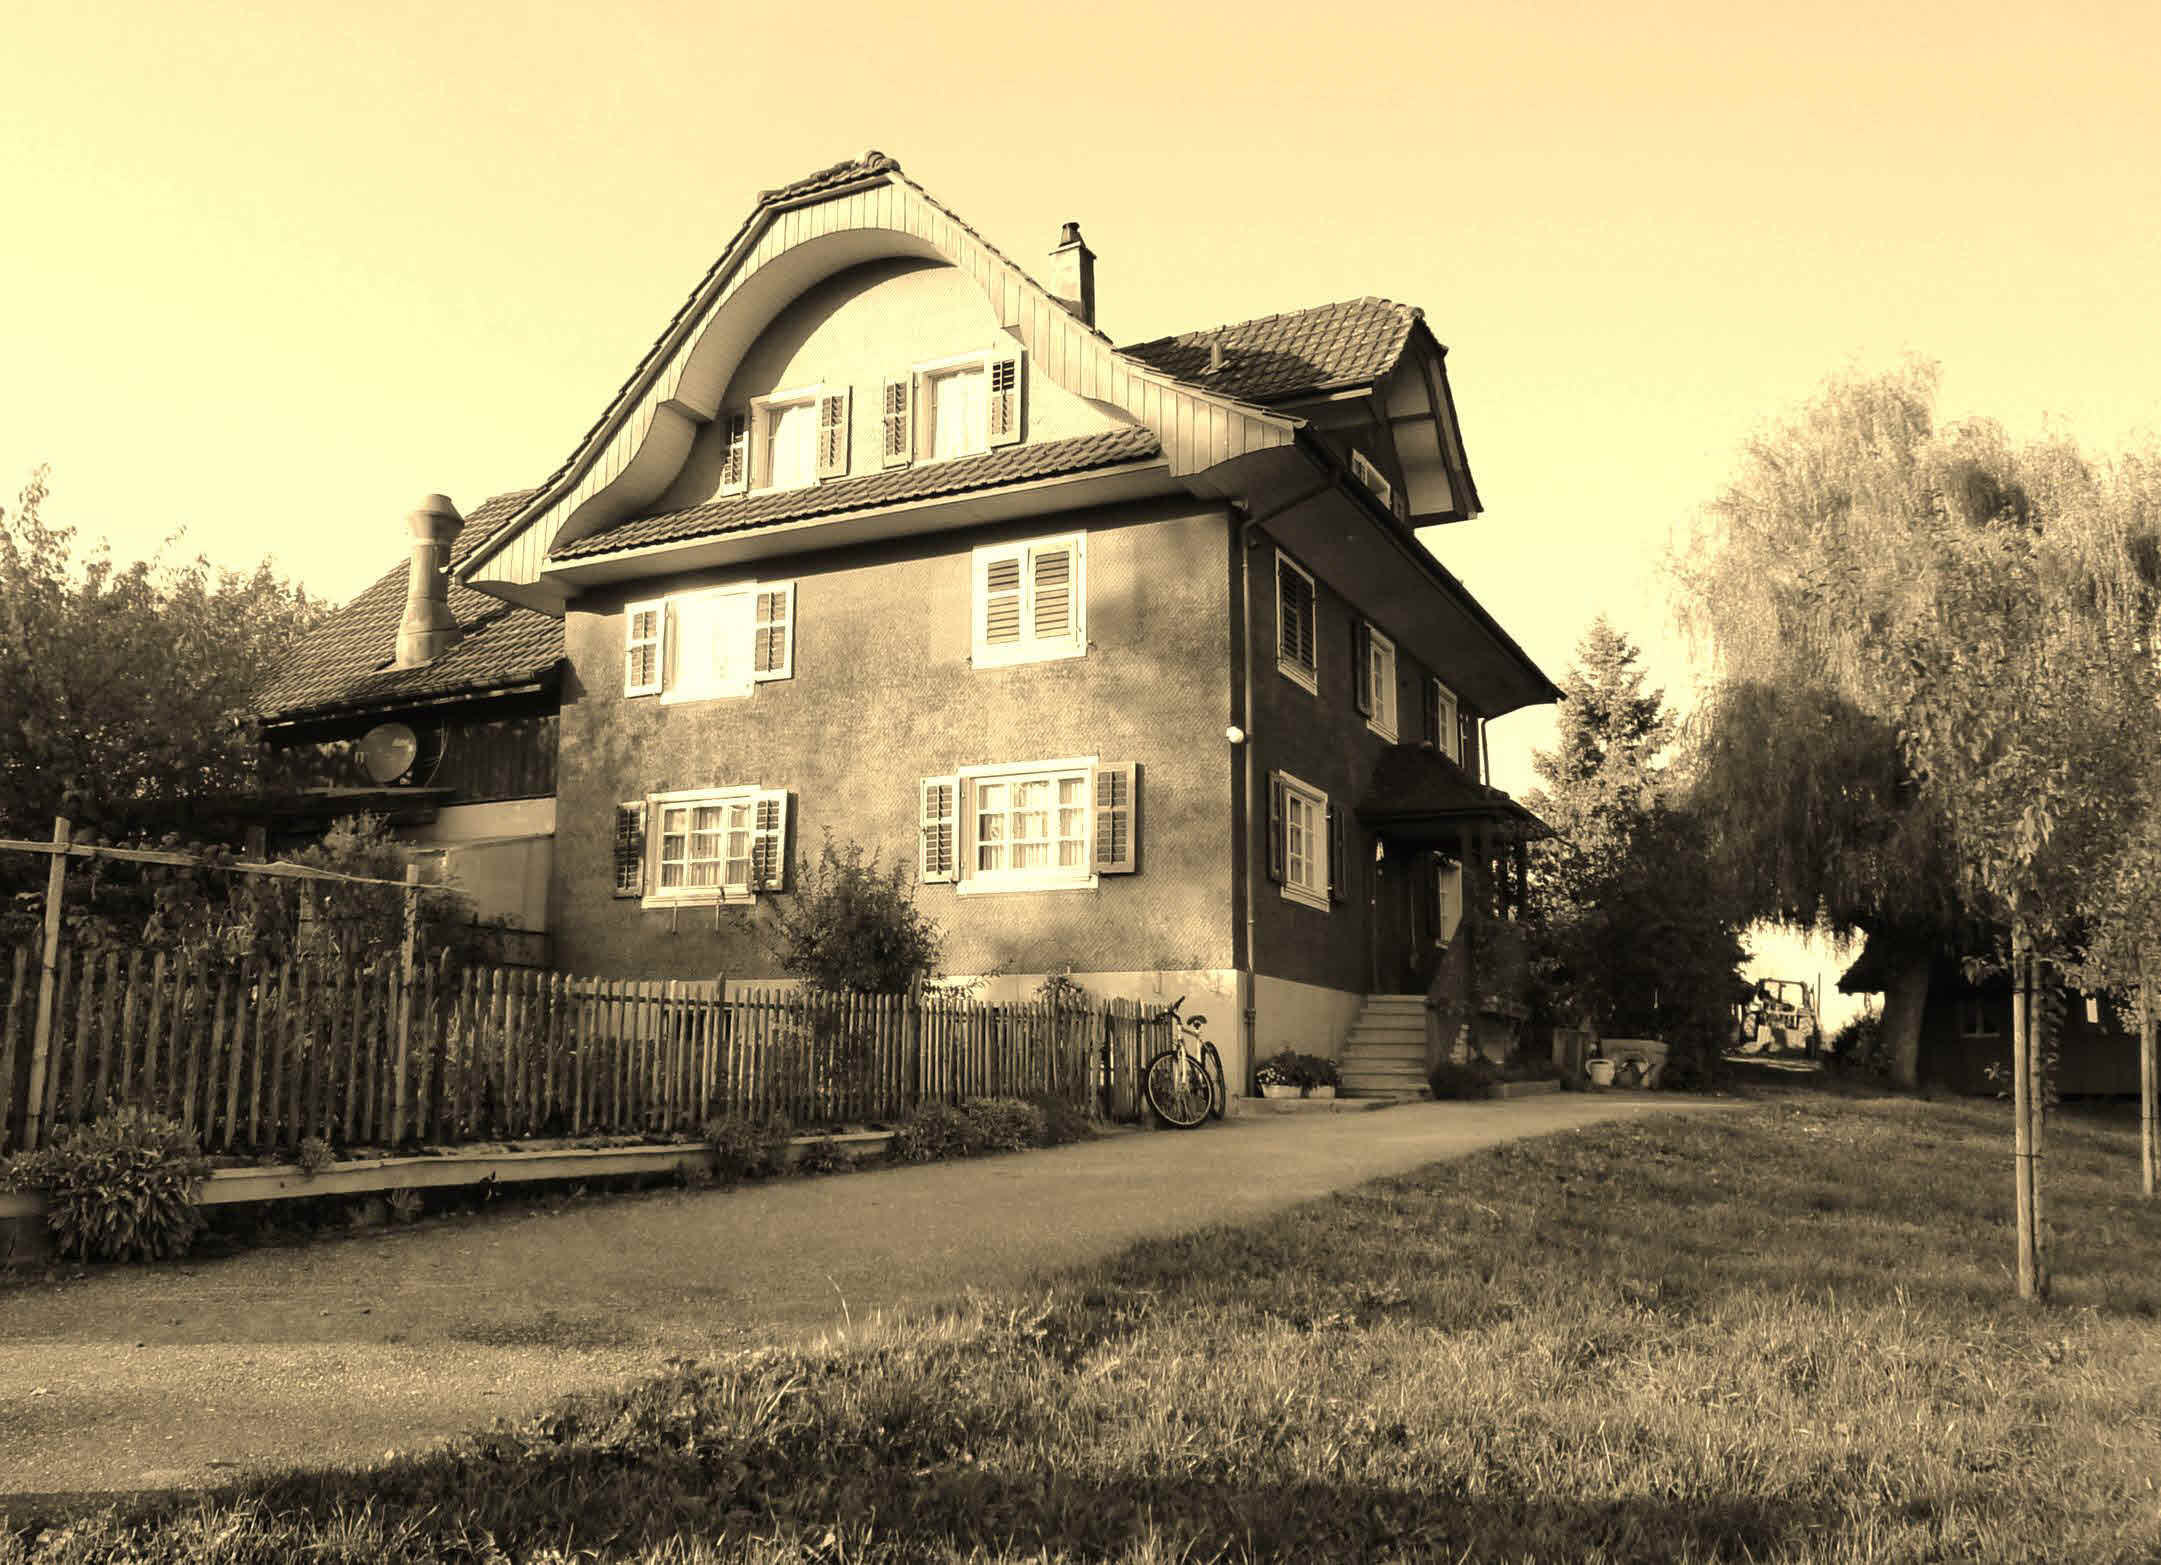 Our house in Ludiswil